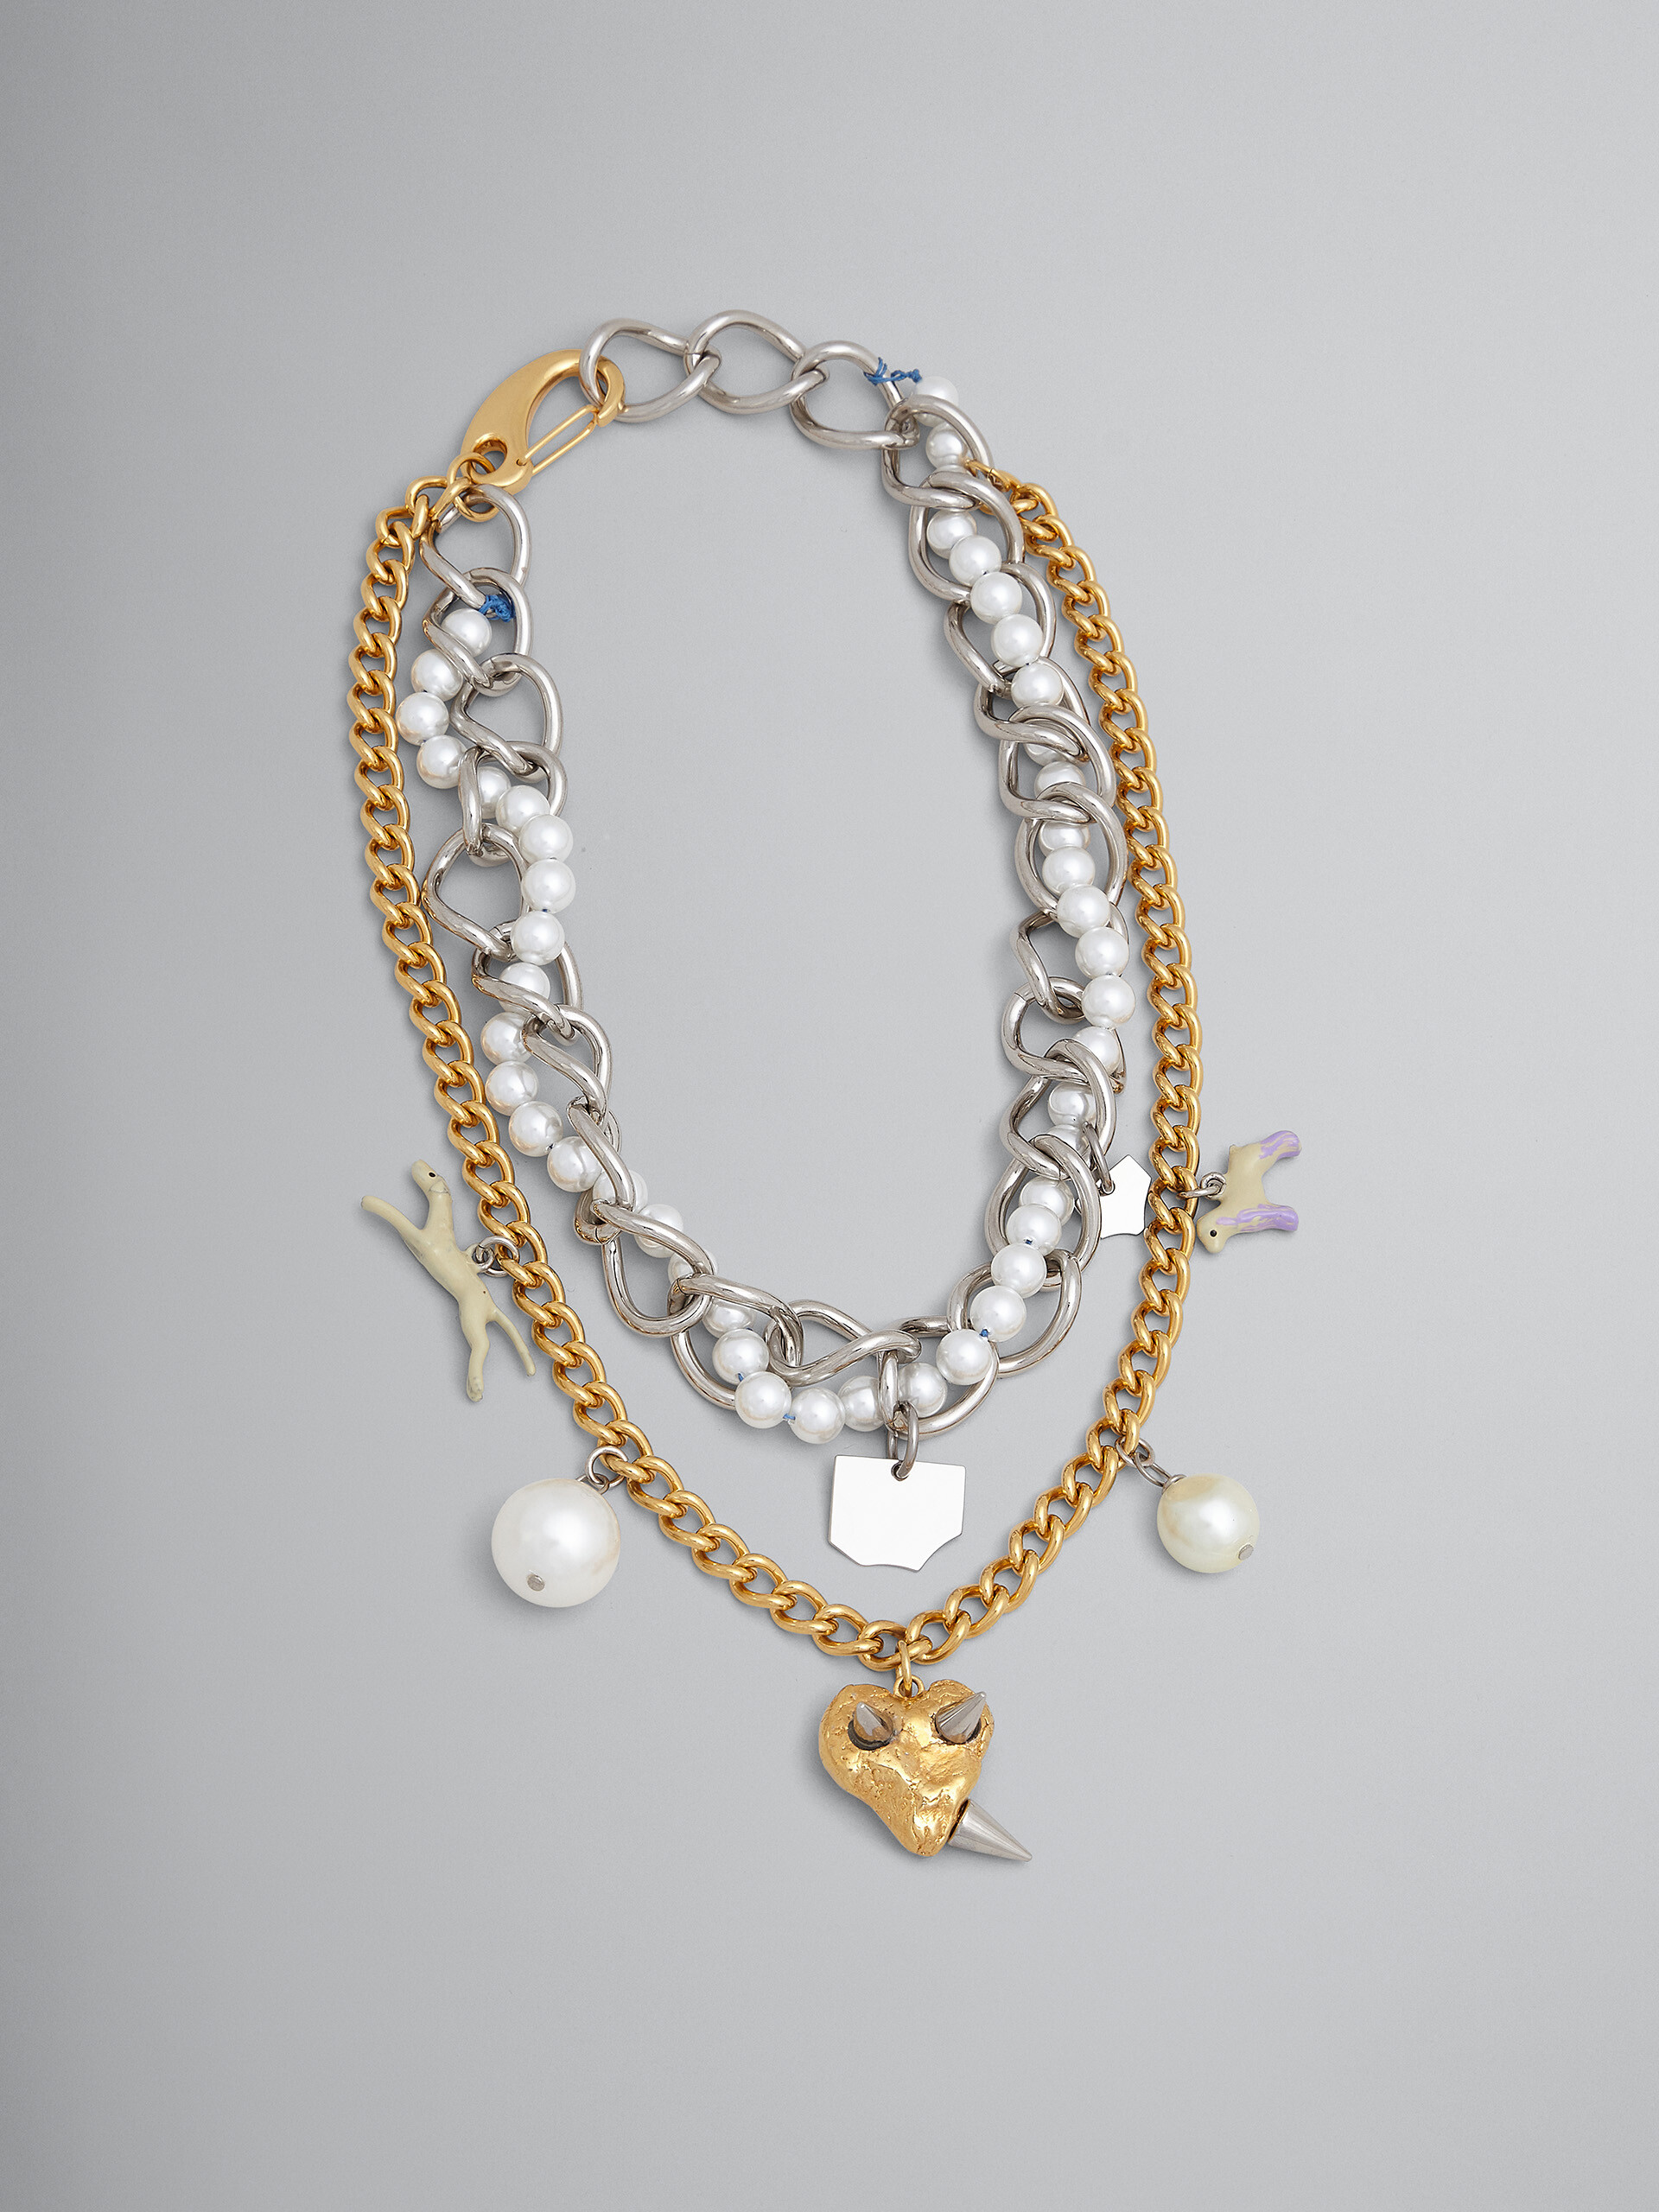 FOUND necklace - Necklaces - Image 1